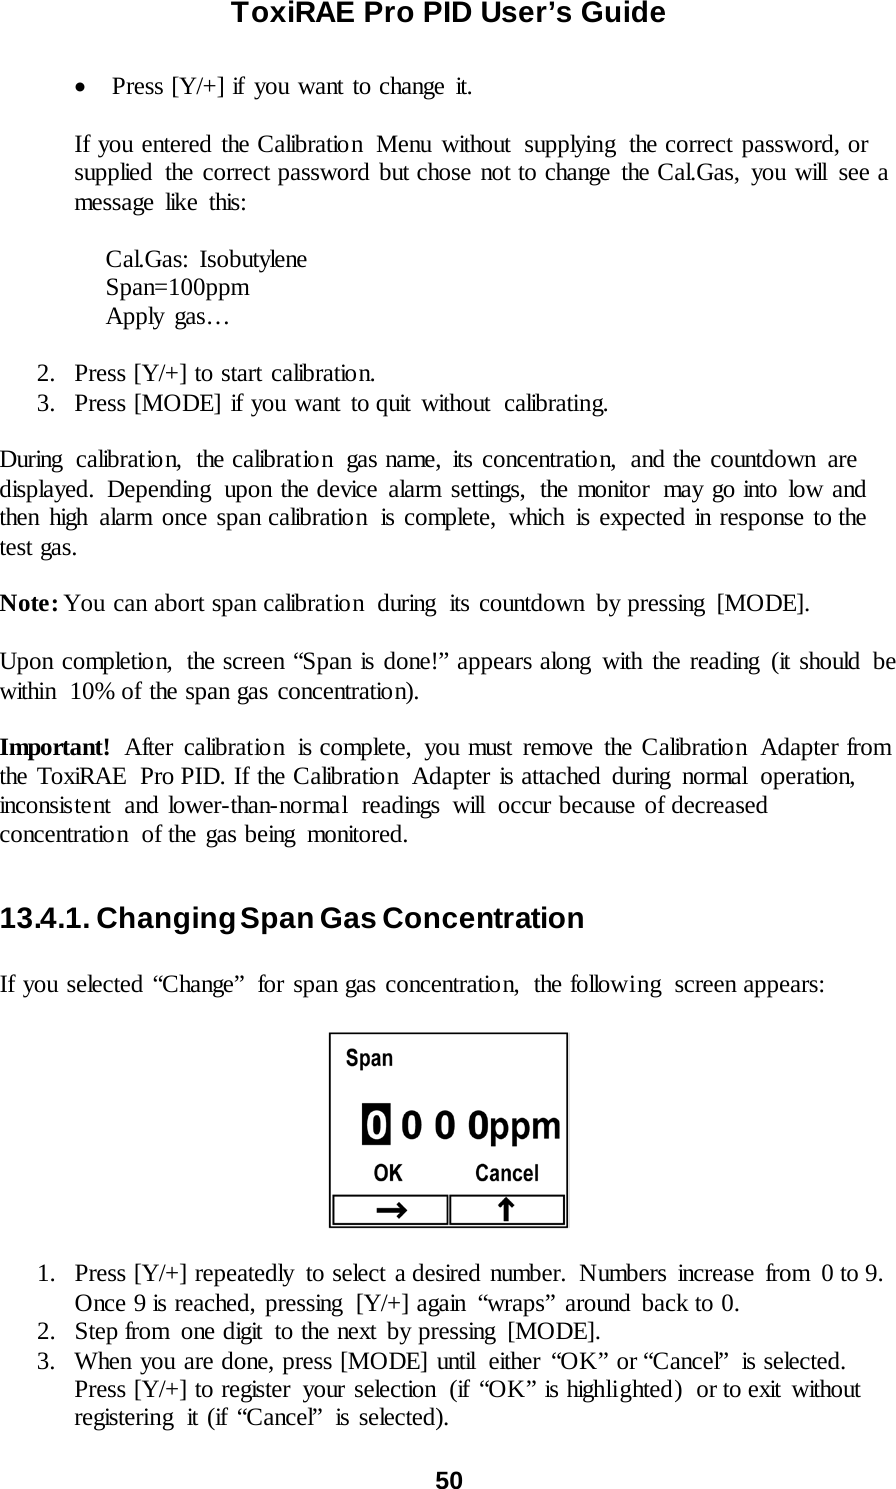 ToxiRAE Pro PID User’s Guide  50   • Press [Y/+] if you want to change it.  If you entered the Calibration  Menu without  supplying  the correct password, or supplied  the correct password but chose not to change the Cal.Gas, you will  see a message like this:       Cal.Gas:  Isobutylene      Span=100ppm      Apply  gas…  2. Press [Y/+] to start calibration. 3. Press [MODE] if you want to quit without calibrating.  During calibration,  the calibration  gas name, its concentration,  and the countdown  are displayed. Depending  upon the device alarm settings,  the monitor  may go into low and then high alarm once span calibration  is complete, which is expected in response to the test gas.  Note: You can abort span calibratio n during its countdown  by pressing  [MODE].  Upon completion,  the screen “Span is done!” appears along with the reading (it should be within  10% of the span gas concentration).  Important!  After calibration is complete, you must remove the Calibration Adapter from the ToxiRAE  Pro PID. If the Calibration  Adapter is attached during  normal  operation, inconsistent  and lower-than-normal  readings  will  occur because of decreased concentration  of the gas being  monitored.  13.4.1. Changing Span Gas Concentration  If you selected “Change” for span gas concentration, the following  screen appears:    1. Press [Y/+] repeatedly  to select a desired number.  Numbers  increase  from  0 to 9. Once 9 is reached, pressing  [Y/+] again  “wraps”  around  back to 0.  2. Step from  one digit  to the next by pressing  [MODE].  3. When you are done, press [MODE] until  either “OK” or “Cancel”  is selected. Press [Y/+] to register  your selection  (if “OK” is highlighted)  or to exit  without registering  it (if “Cancel” is selected). 